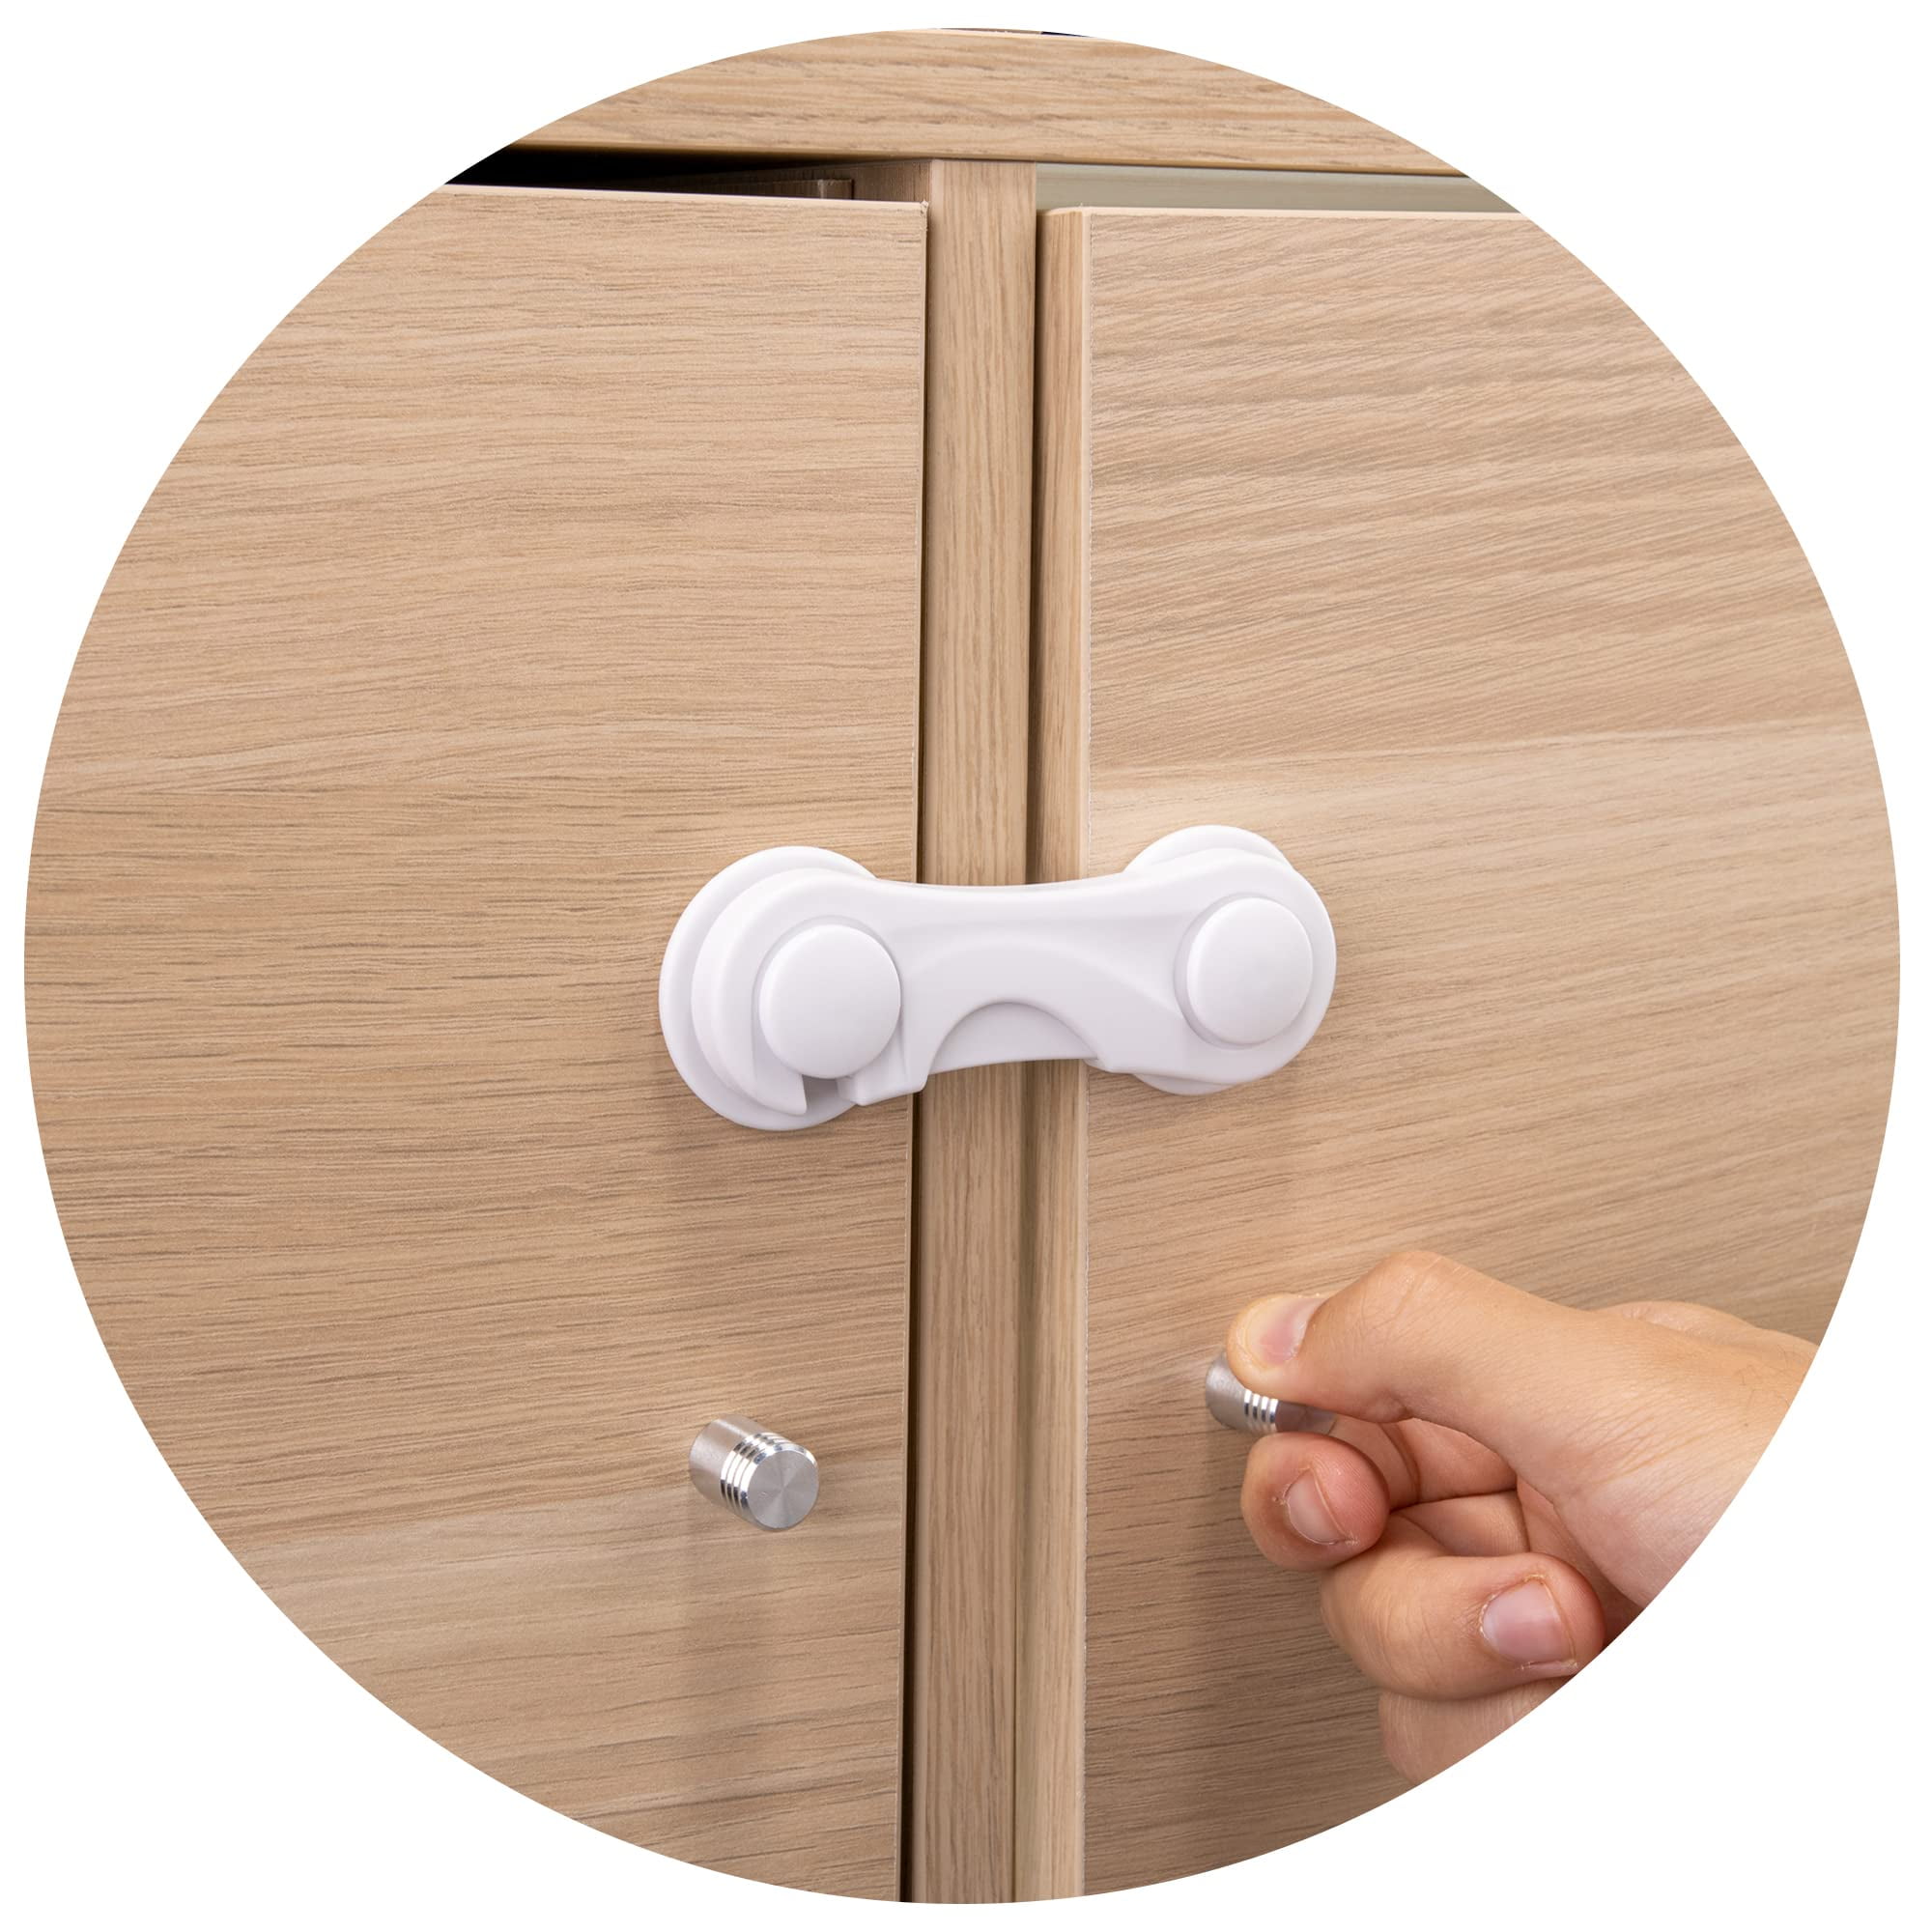 Jinyi Kids Cabinet Safety Locks, Child & Baby Safety Proof Safety Cabinet  Door Box Lock, Easy Install In Seconds For Dresser, Refrigerator, Oven,  Toil